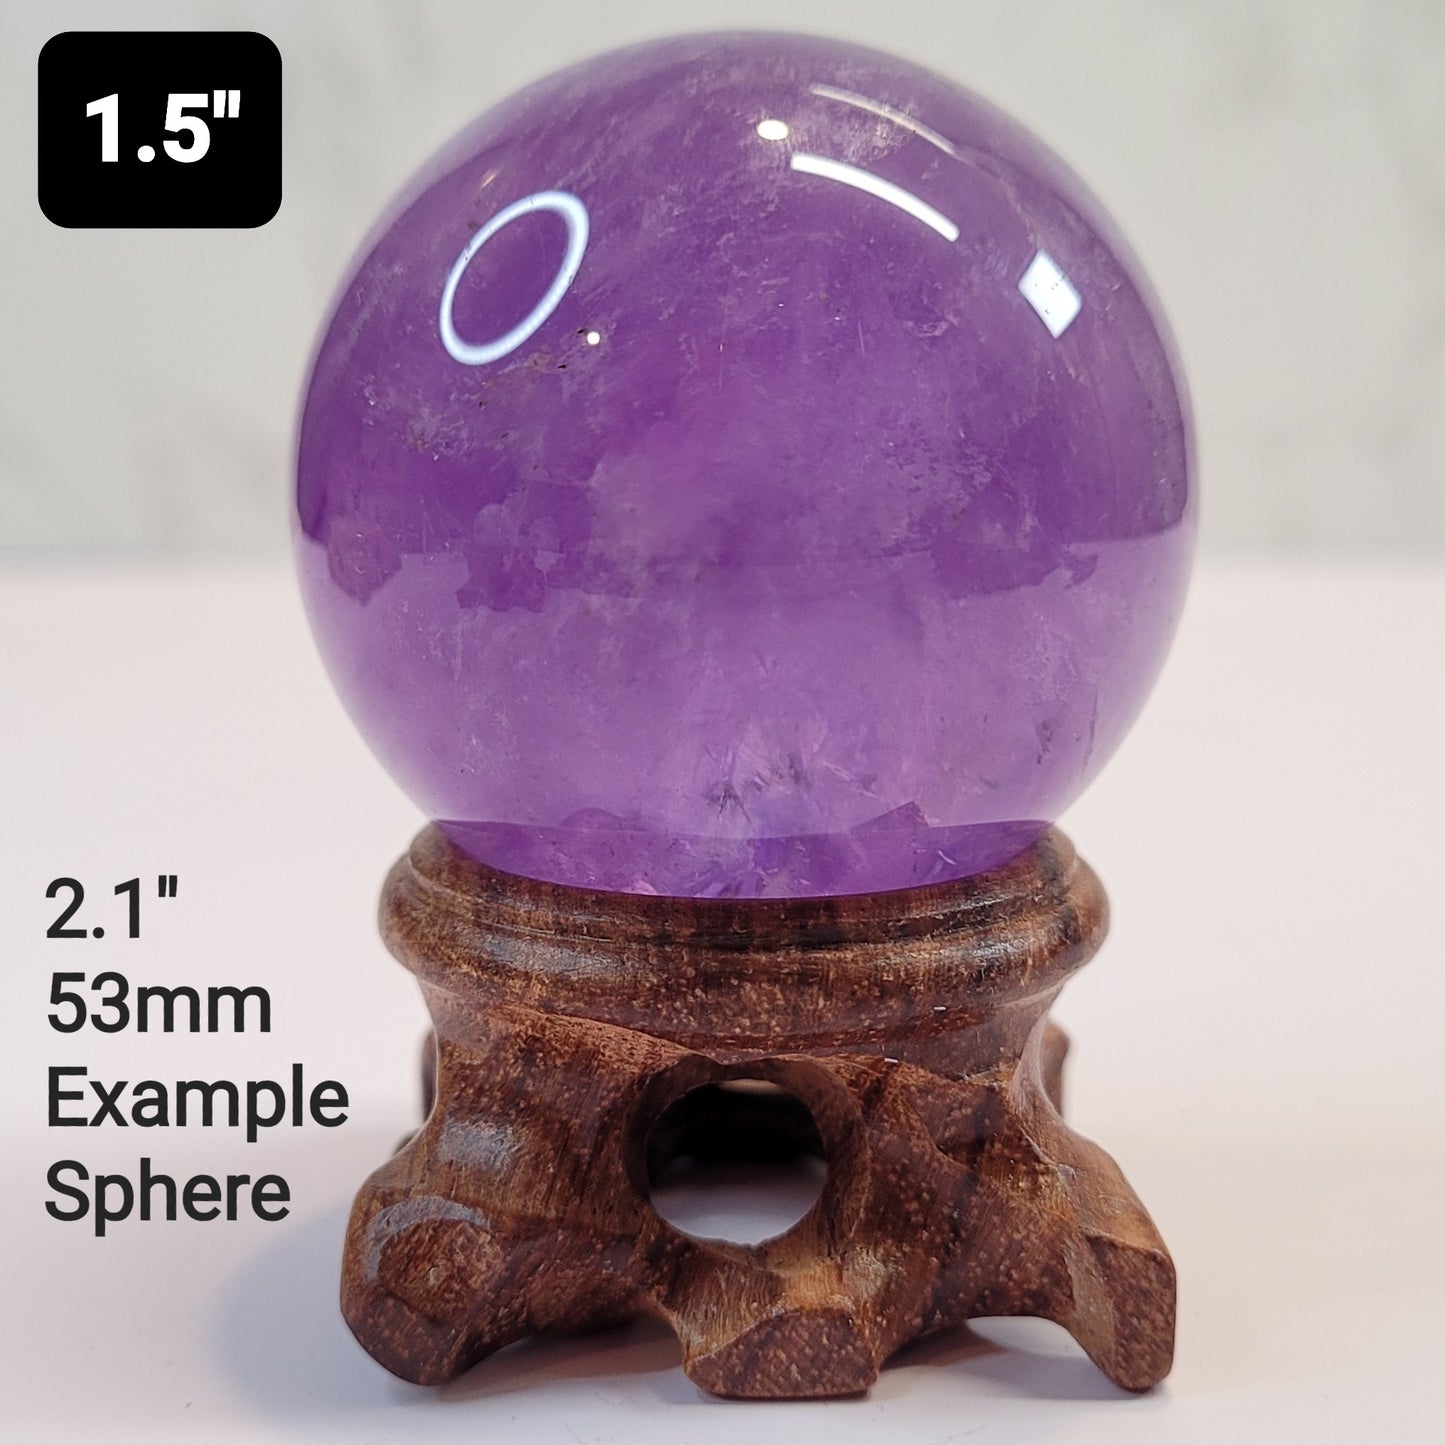 Wood Sphere Stand in 7 Sizes, Crystal Ball Holder, Display Stand for Spheres 1" to 12" (26mm to 405mm)